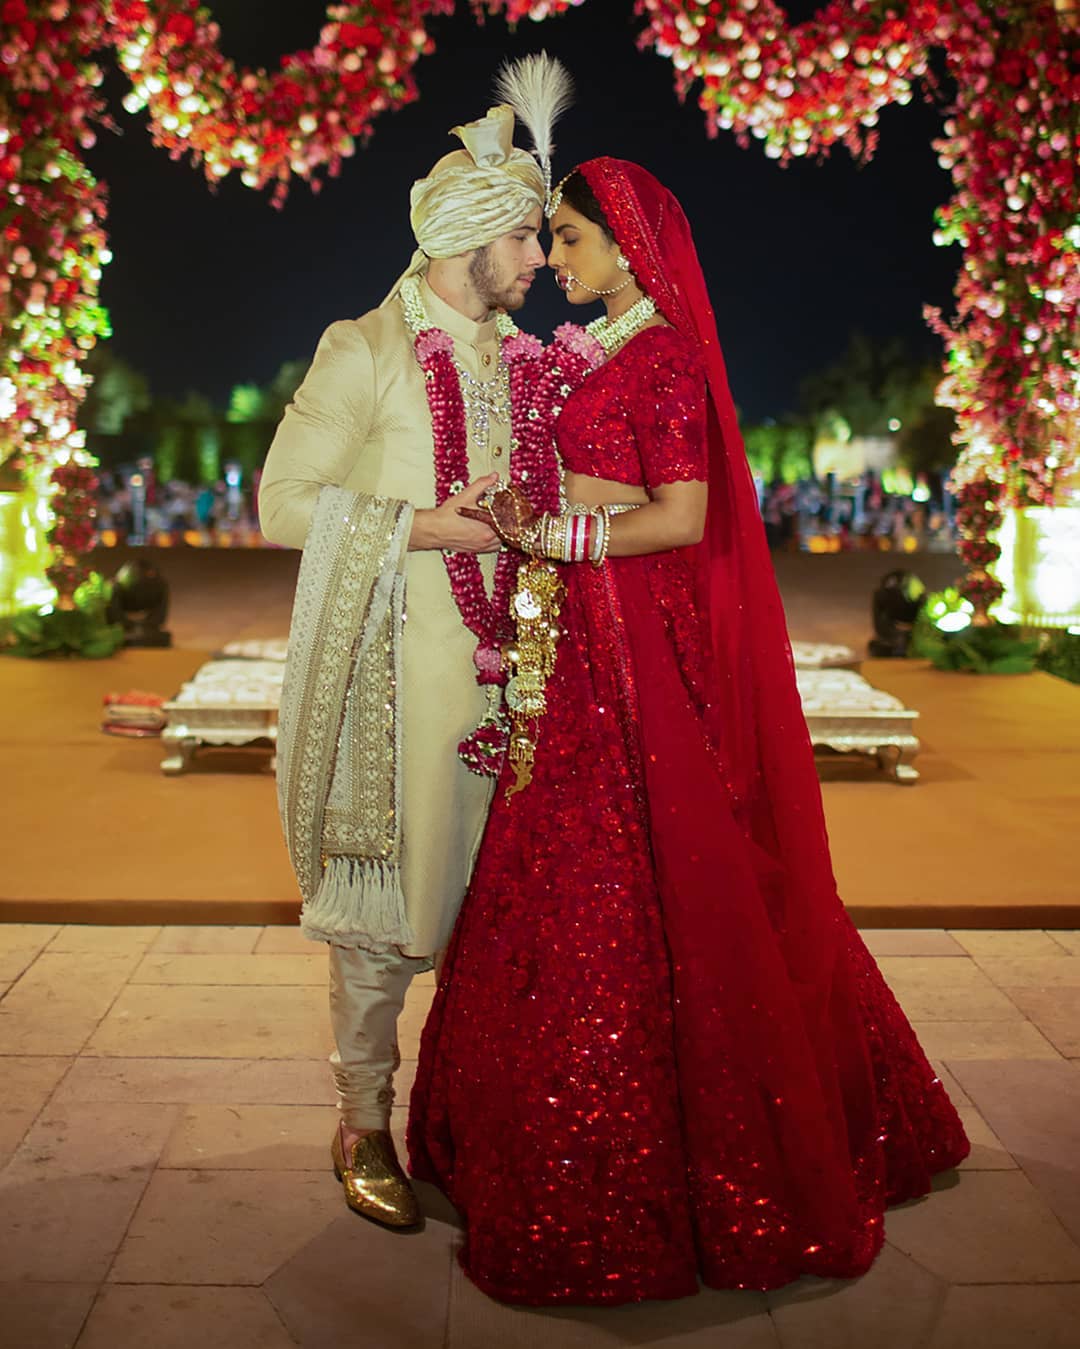 Priyanka Chopra tied the knot with American singer Nick Jonas in a lavish two-day ceremony at the Umaid Bhawan Palace in Jodhpur on December 1 and 2.